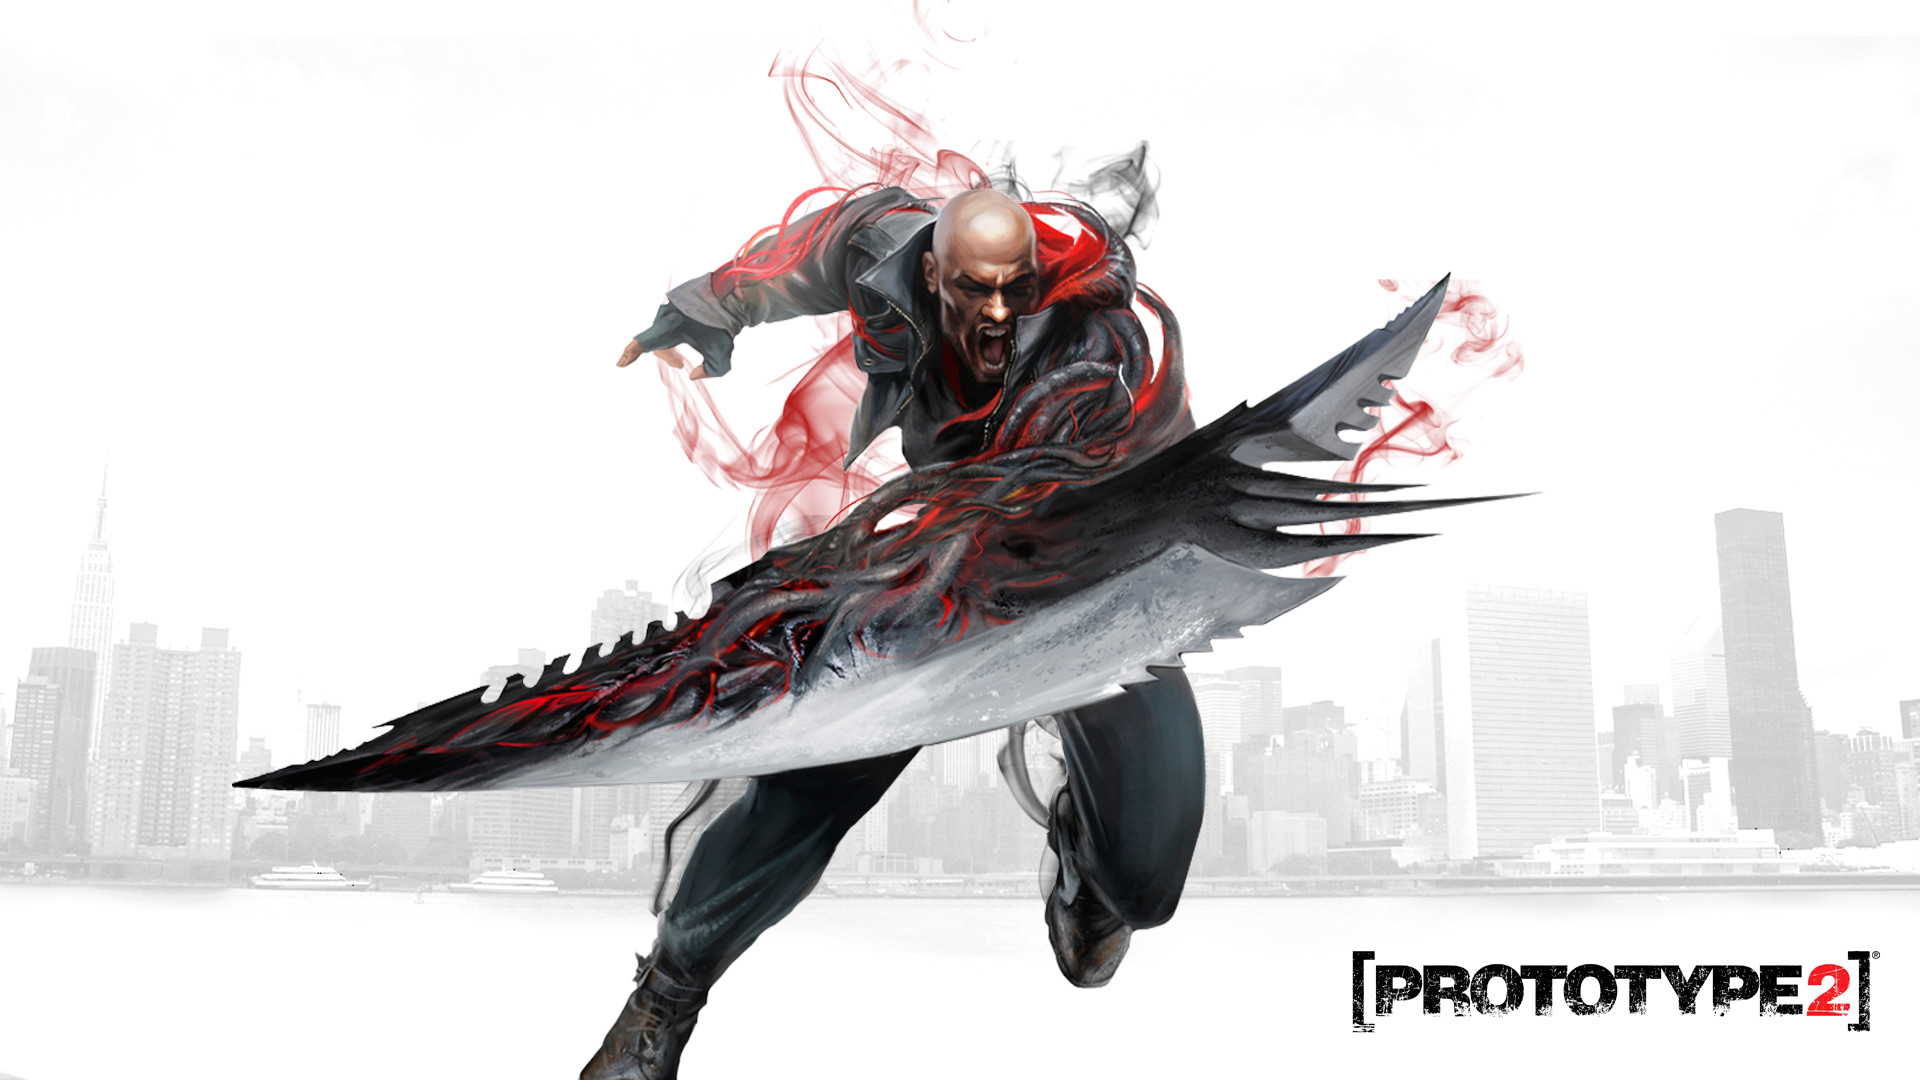 1920x1080 televideoDMB 81 40 Prototype 2 Wallpaper by andyNroses